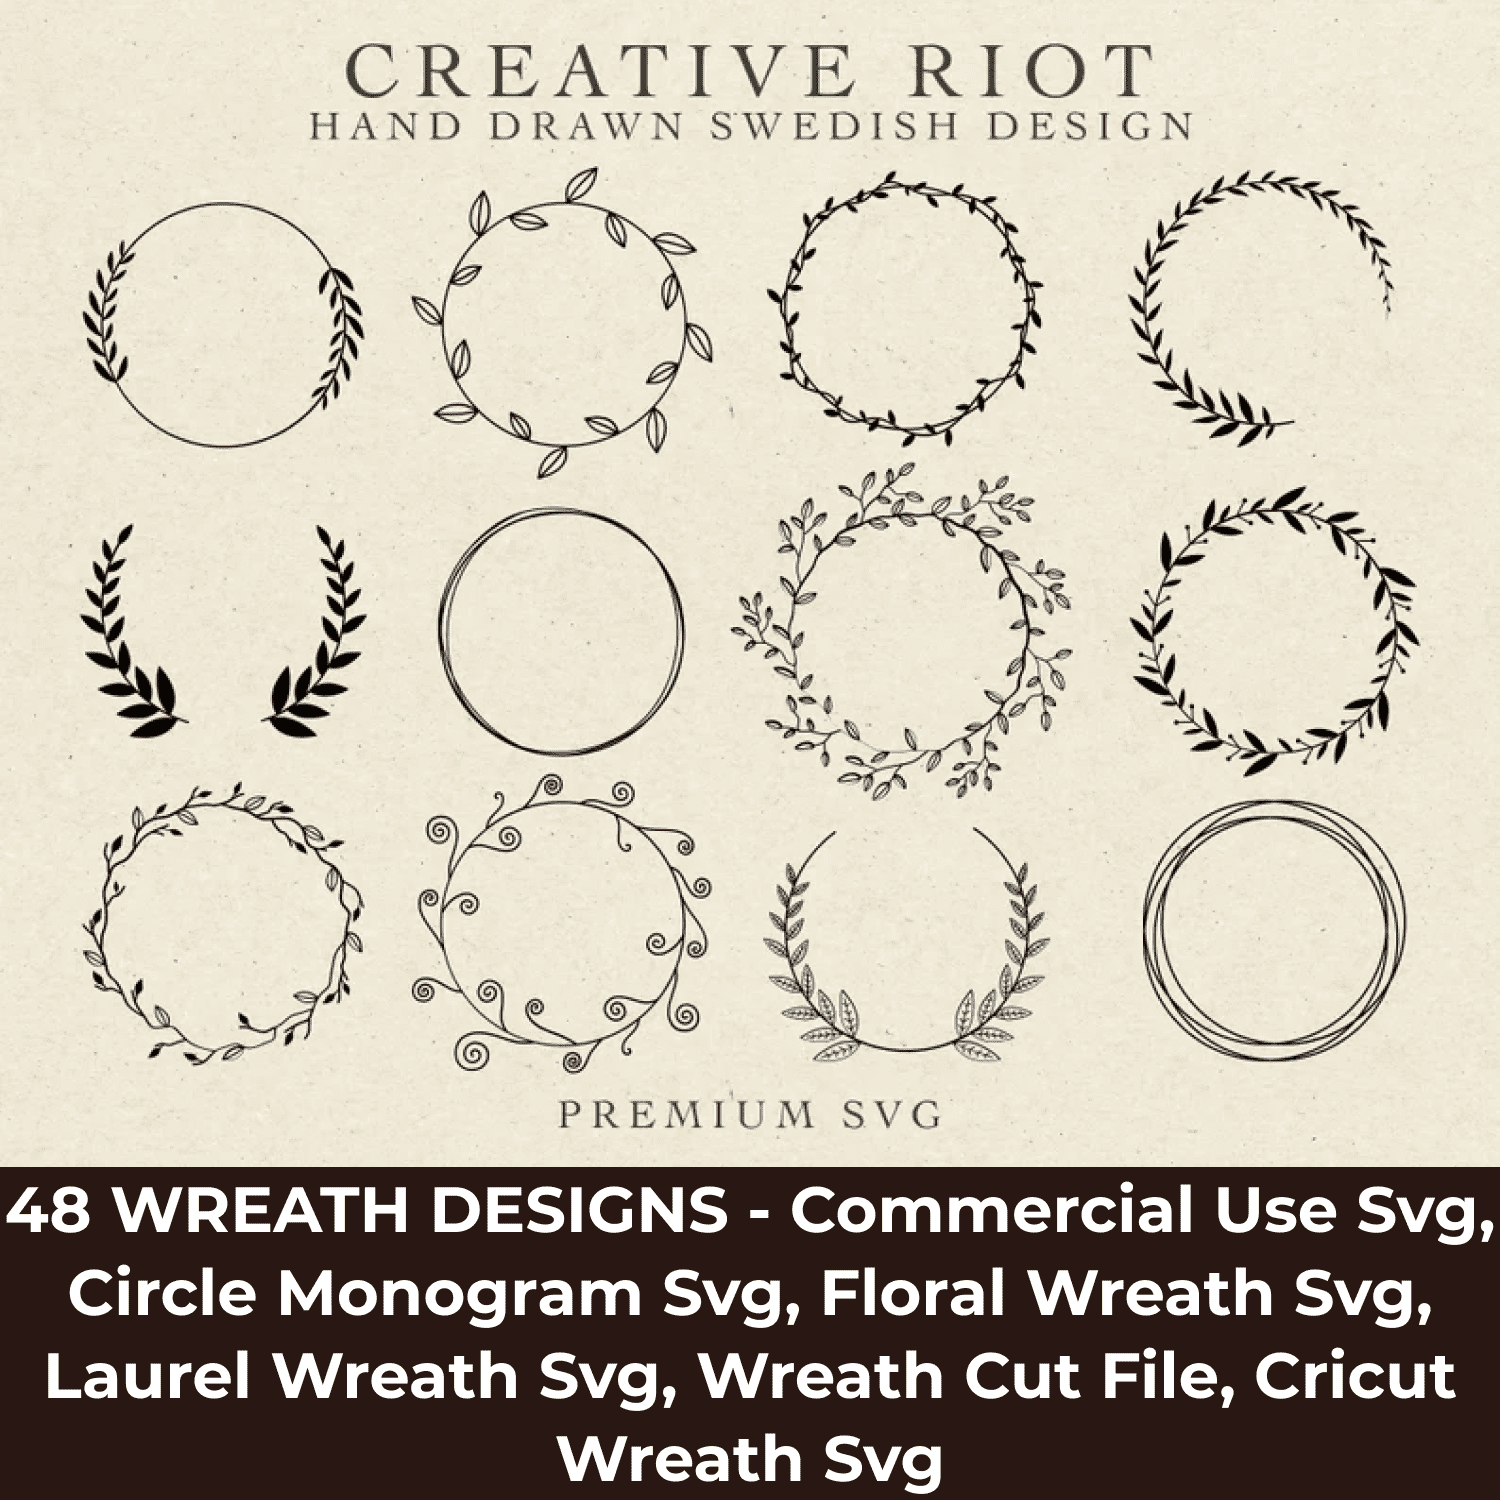 48 Wreath Designs - Commercial Use SVG cover.